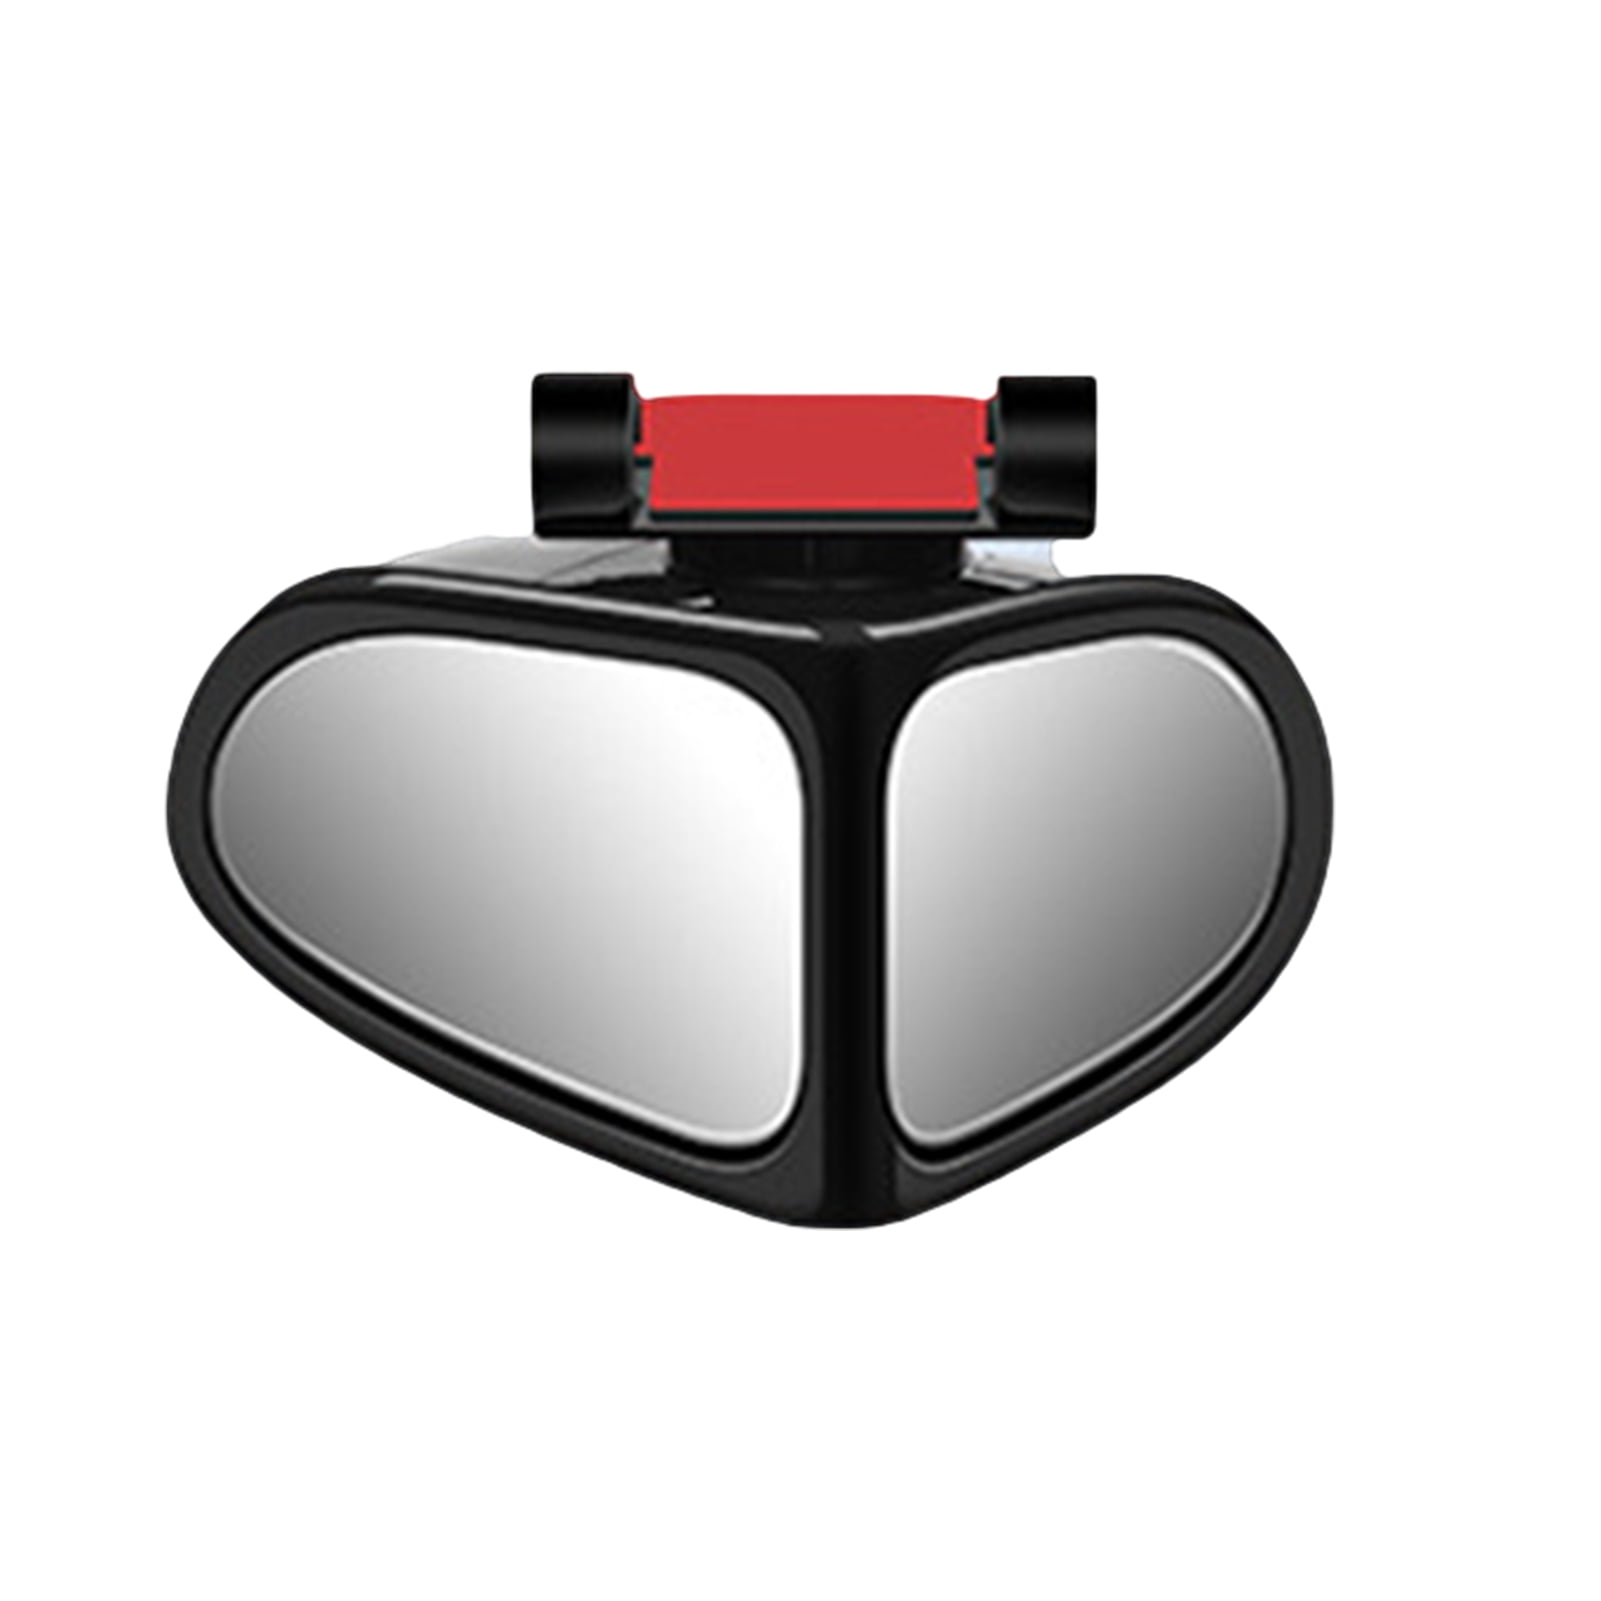 Bobasndm 2 in 1 Blind Spot Mirror,Convex Wide Angle Rear View Mirror 360  Degree Rotation Adjustable Universal Car Auxiliary Mirror Front/Rear Wheels